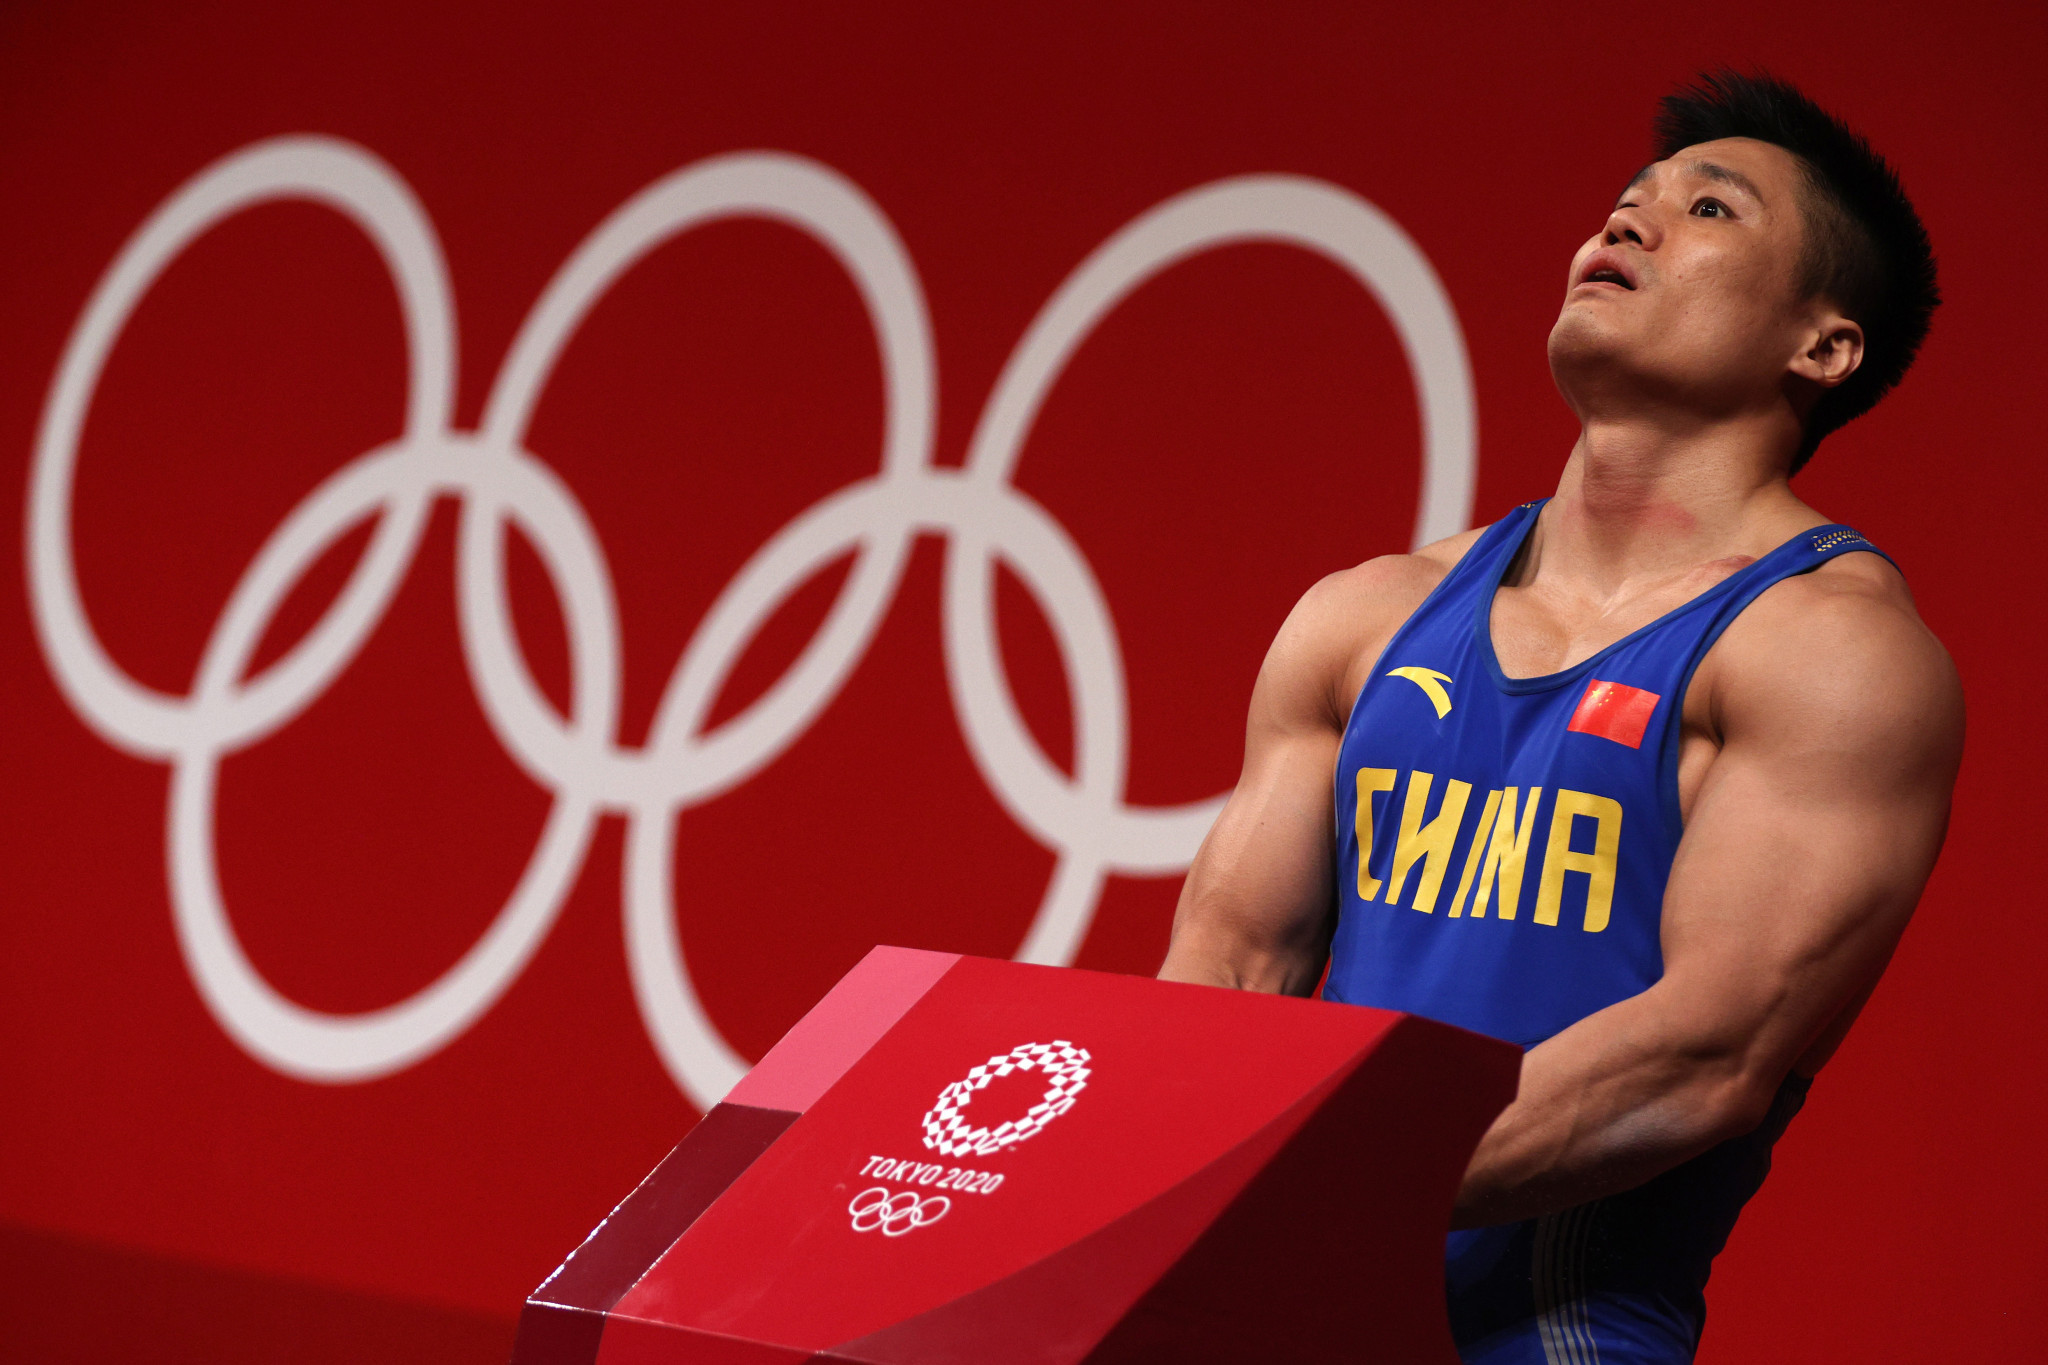 China's triple Olympic weightlifting champion Lu Xiaojun tests positive for EPO